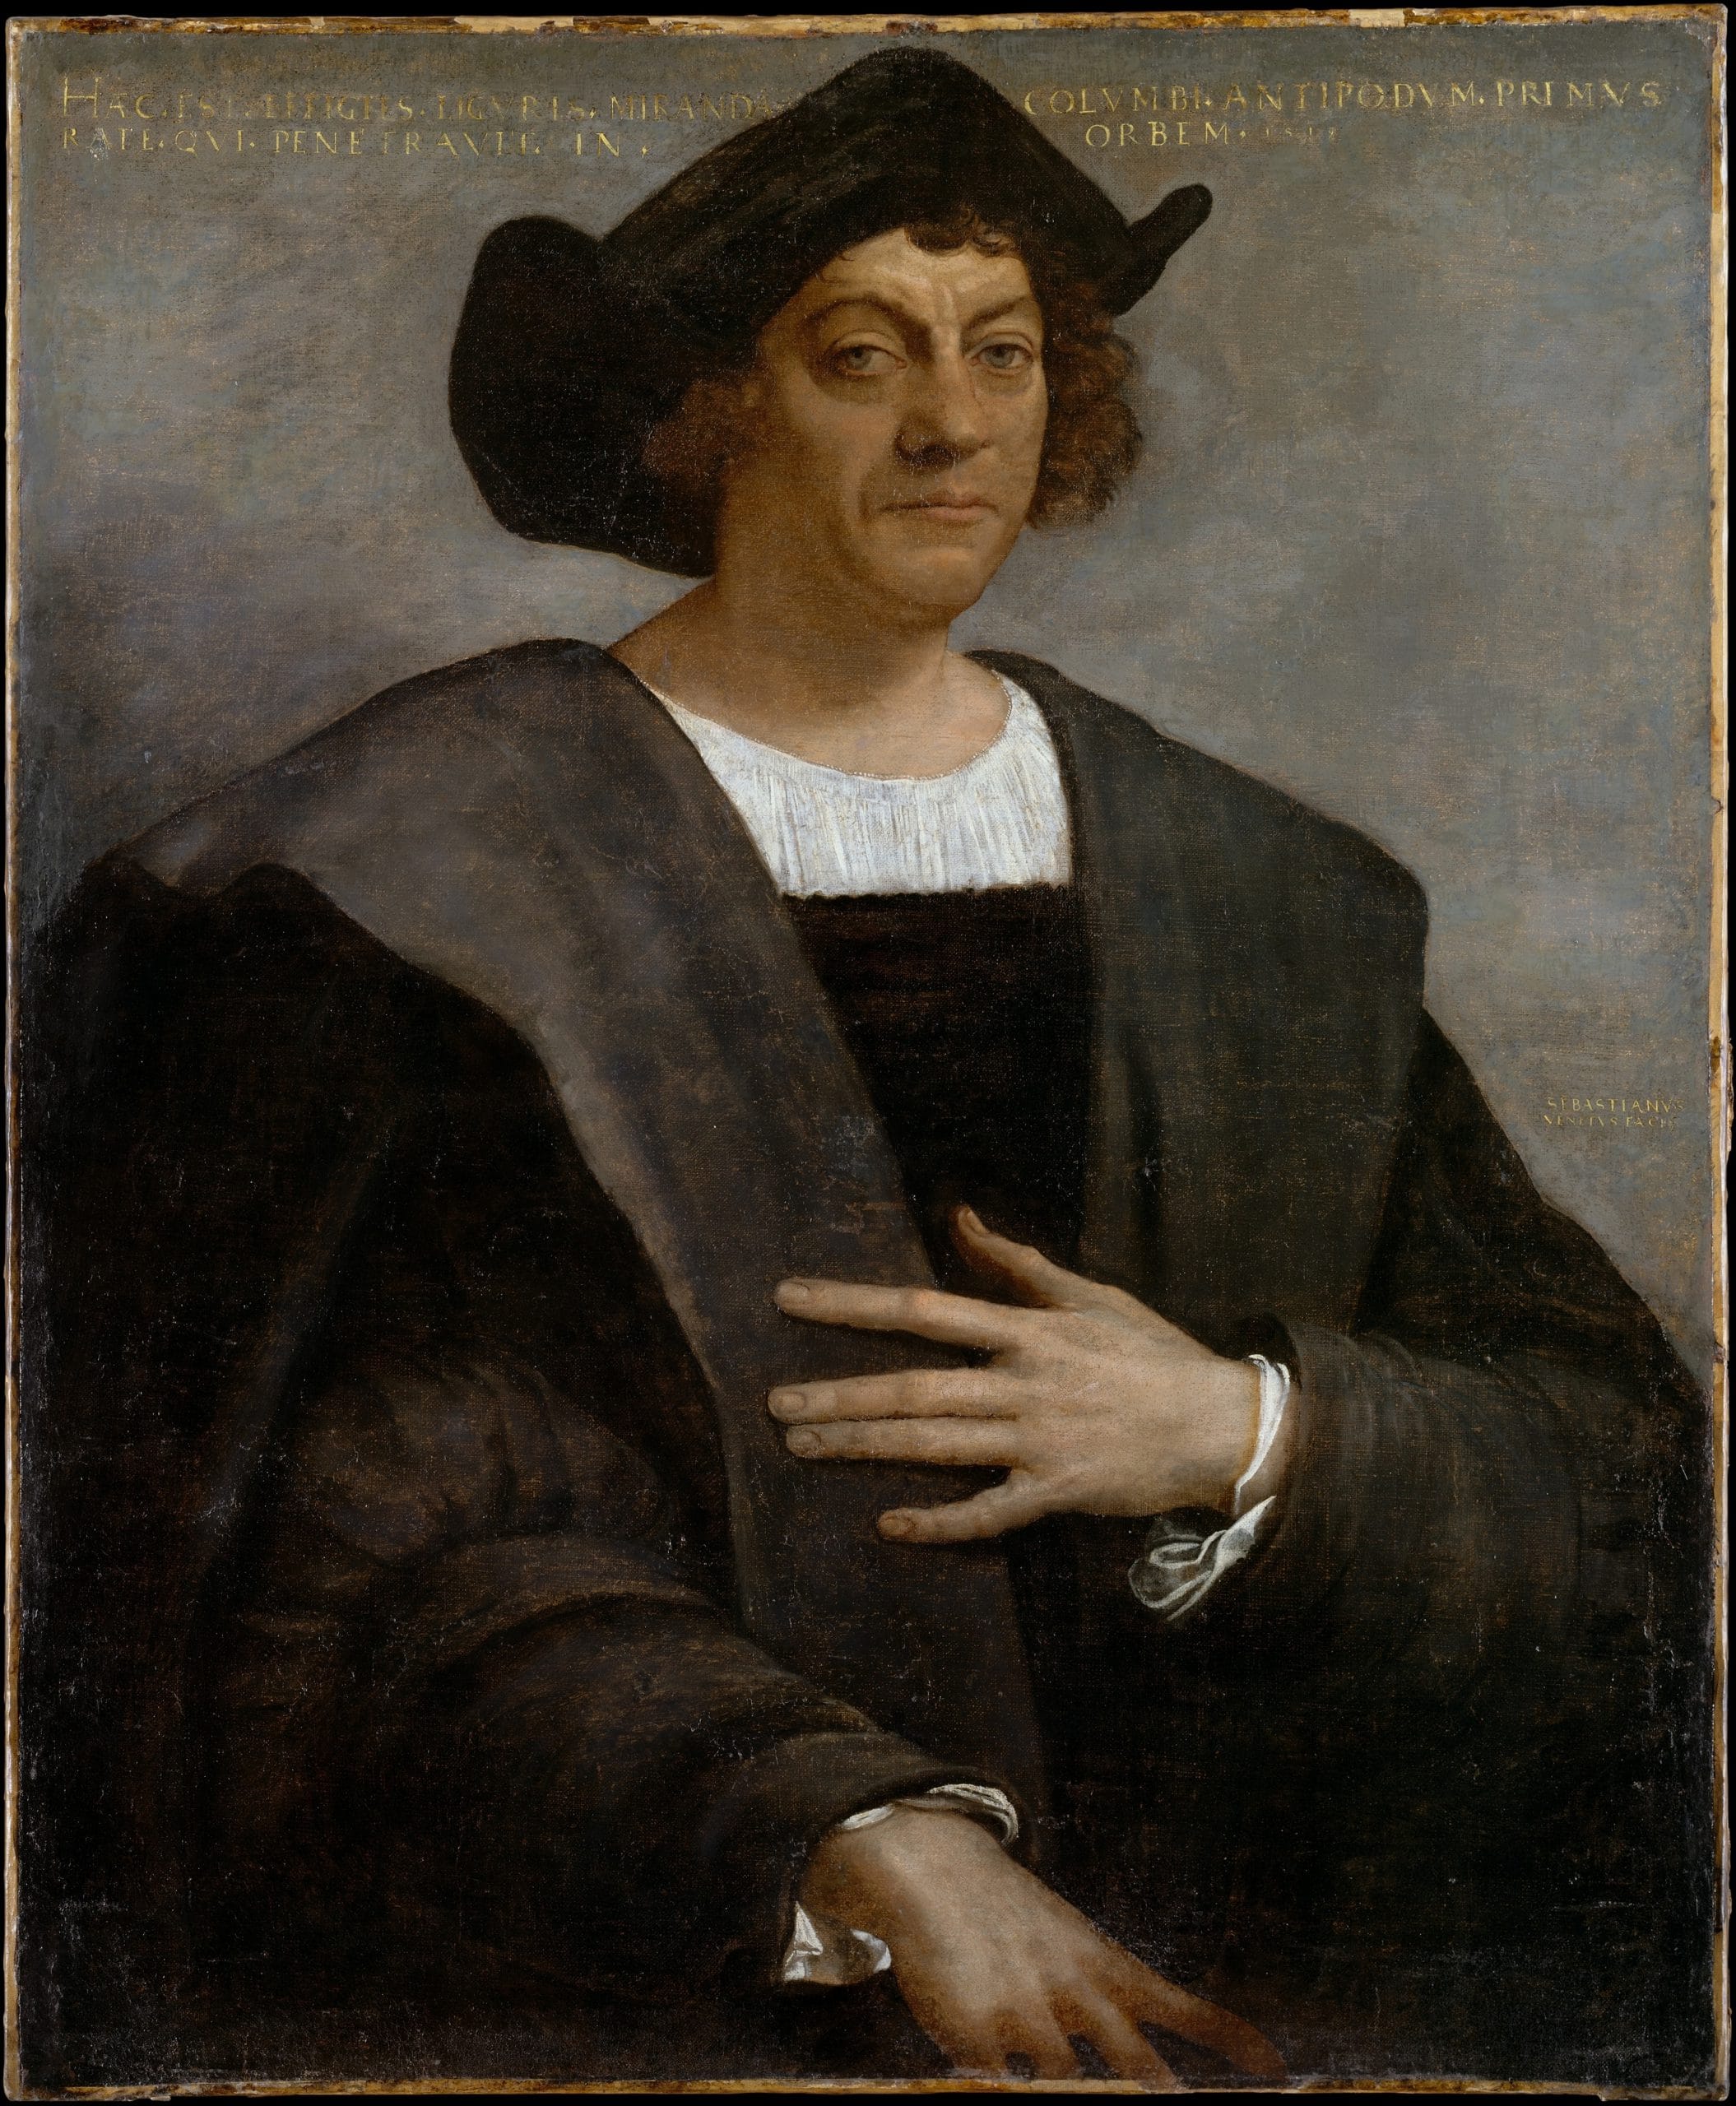 Portrait of a man thought to be Columbus in the Metropolitan Museum of Art, NYC